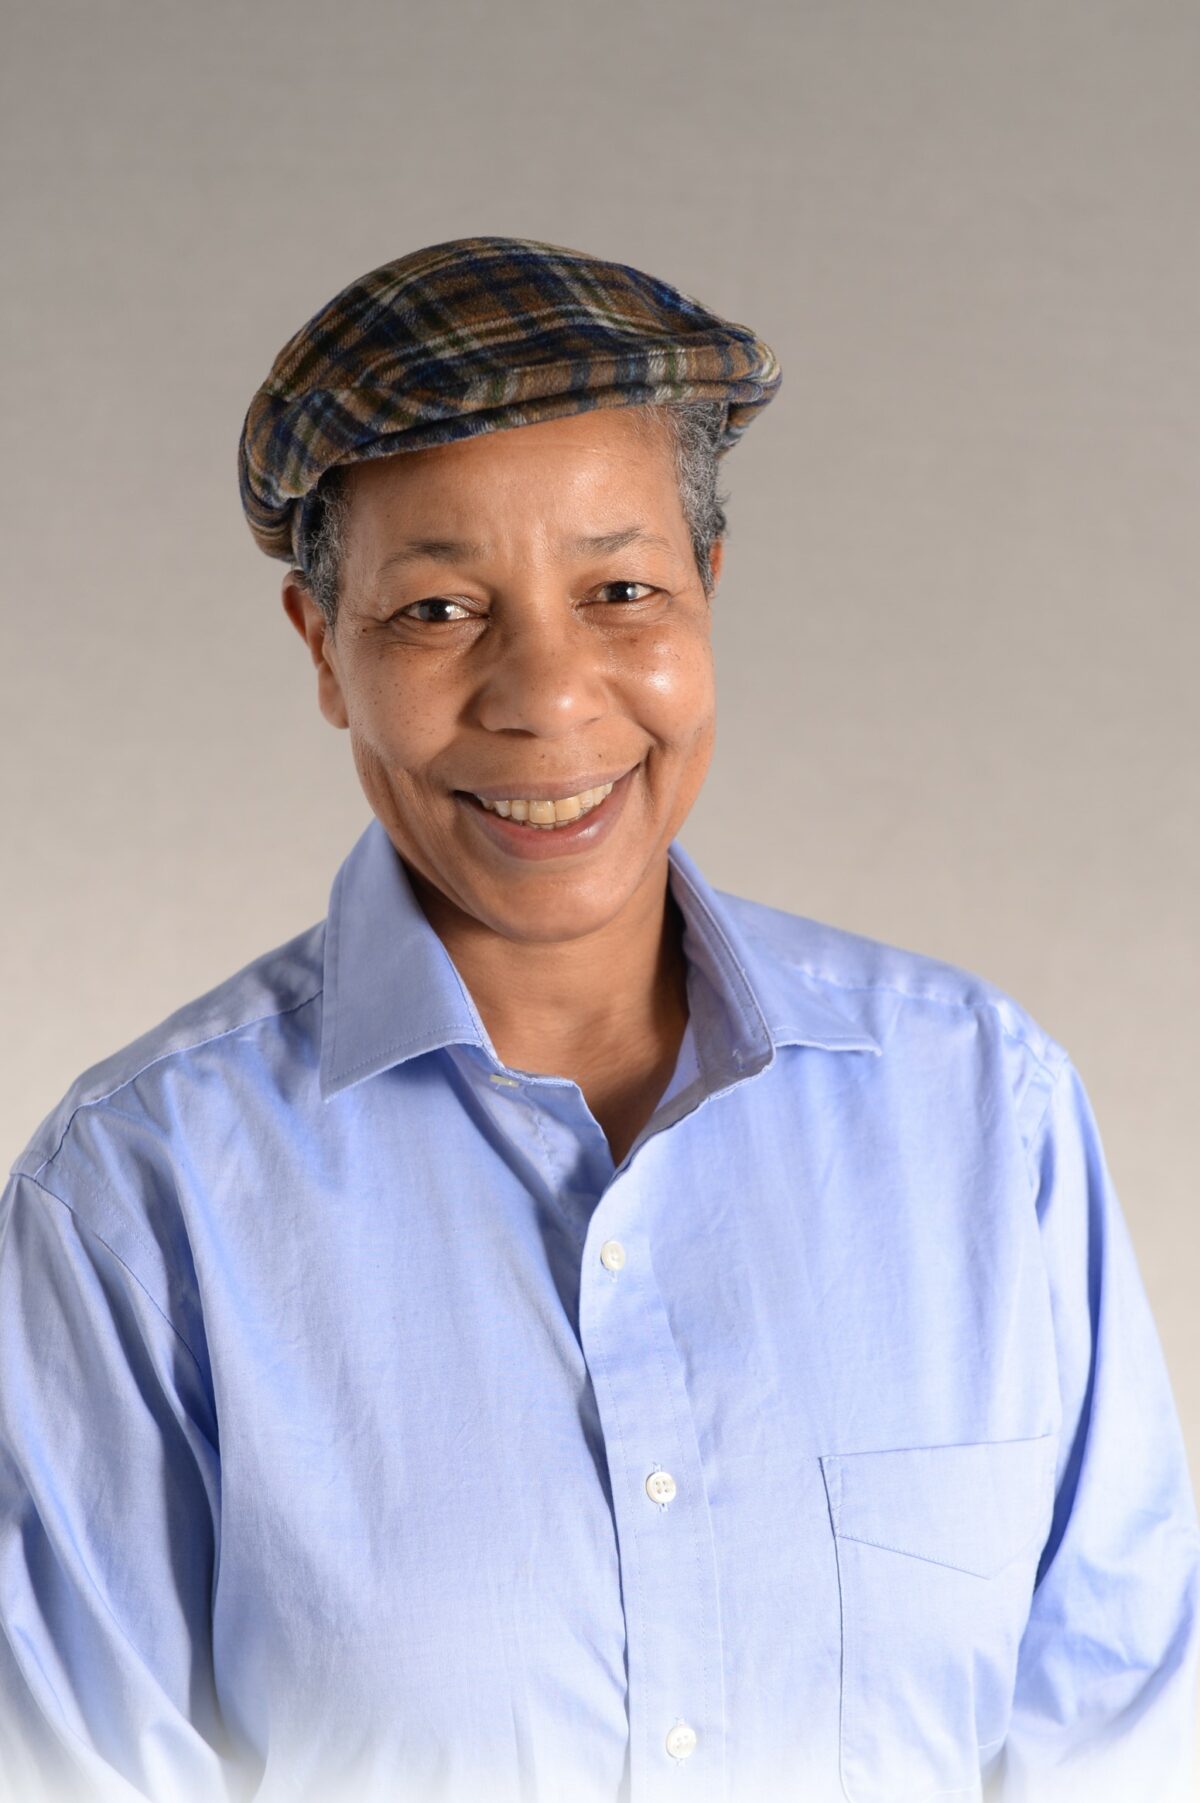 Black woman wearing a blue button-up shirt and a plaid cap.